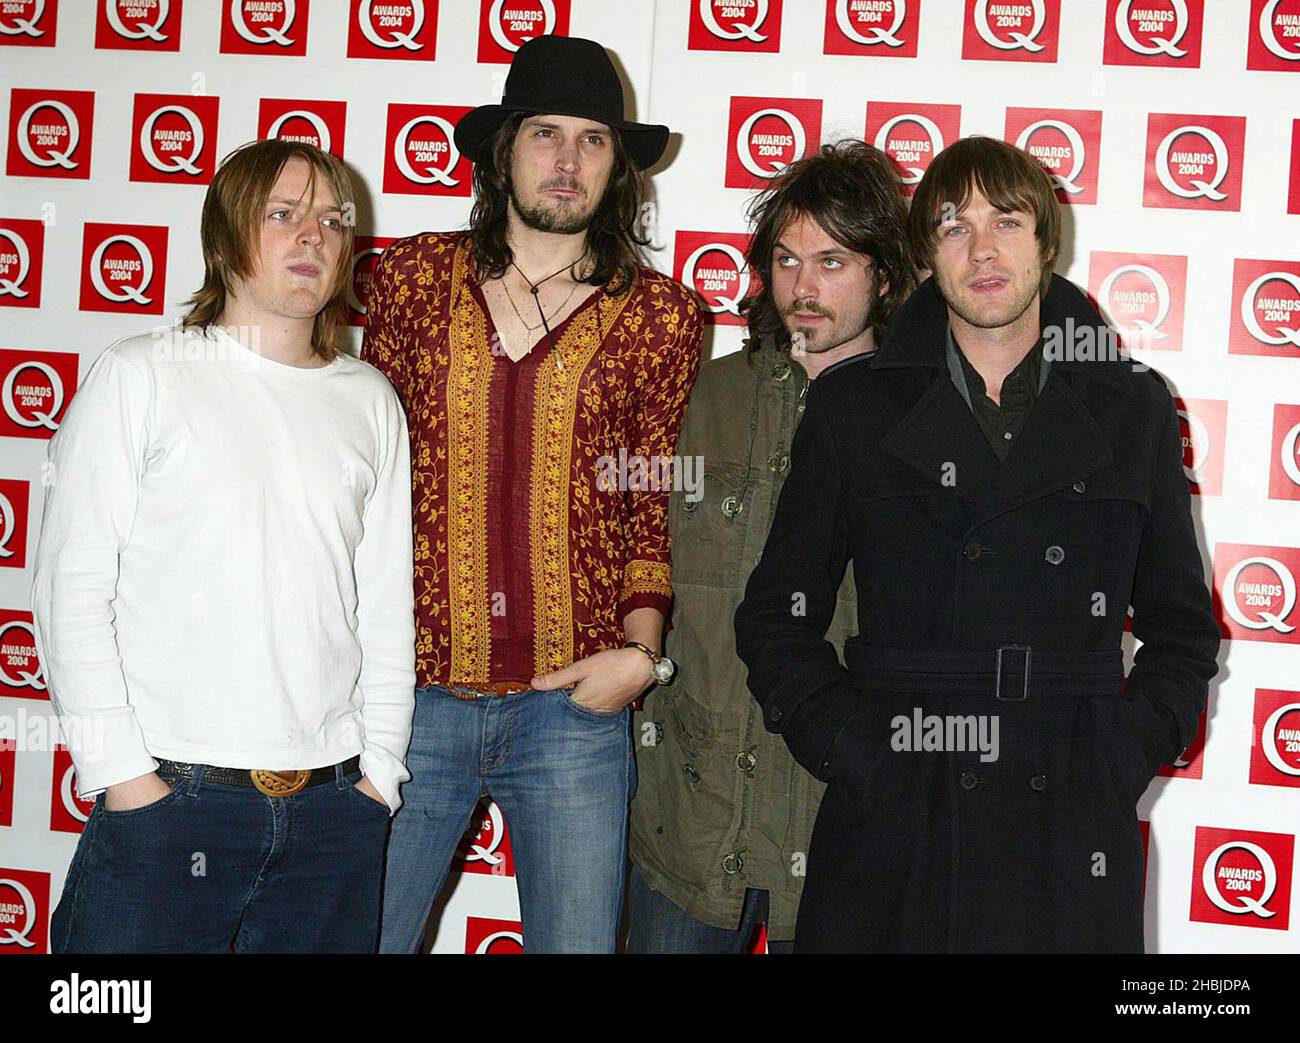 Kasabian arrive at the Q Awards at the Grosvenor House Hotel in Park Lane in London. Head shot Stock Photo